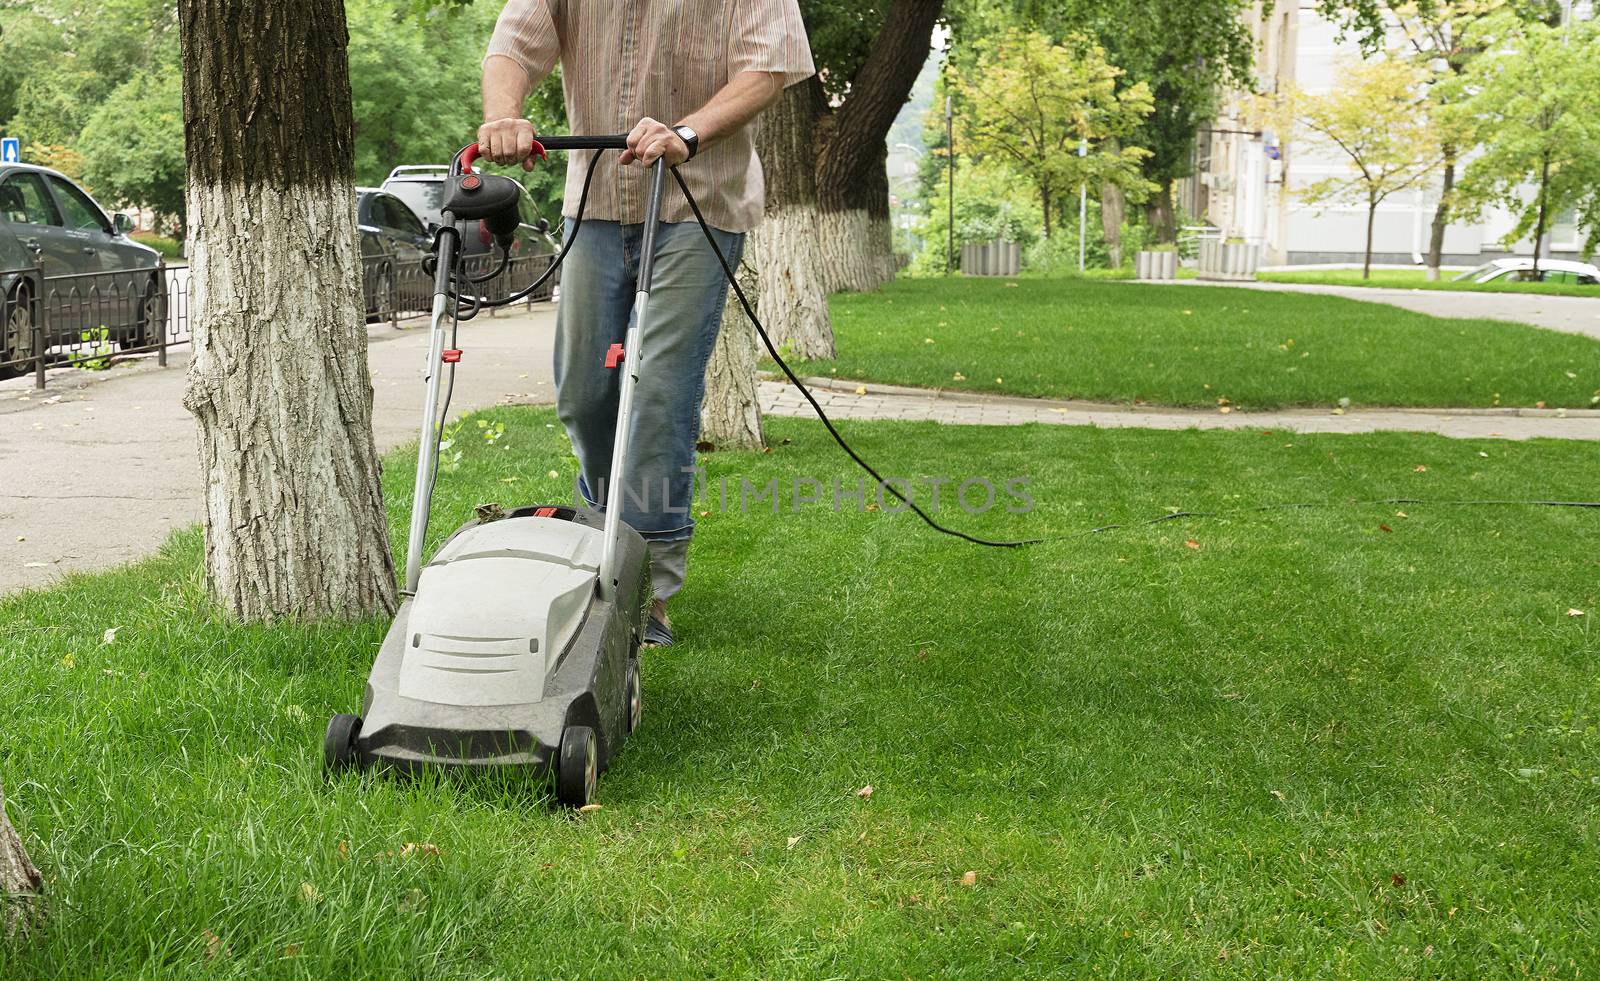 Worker with a electric lawn mower cares for an urban lawn near the sidewalk